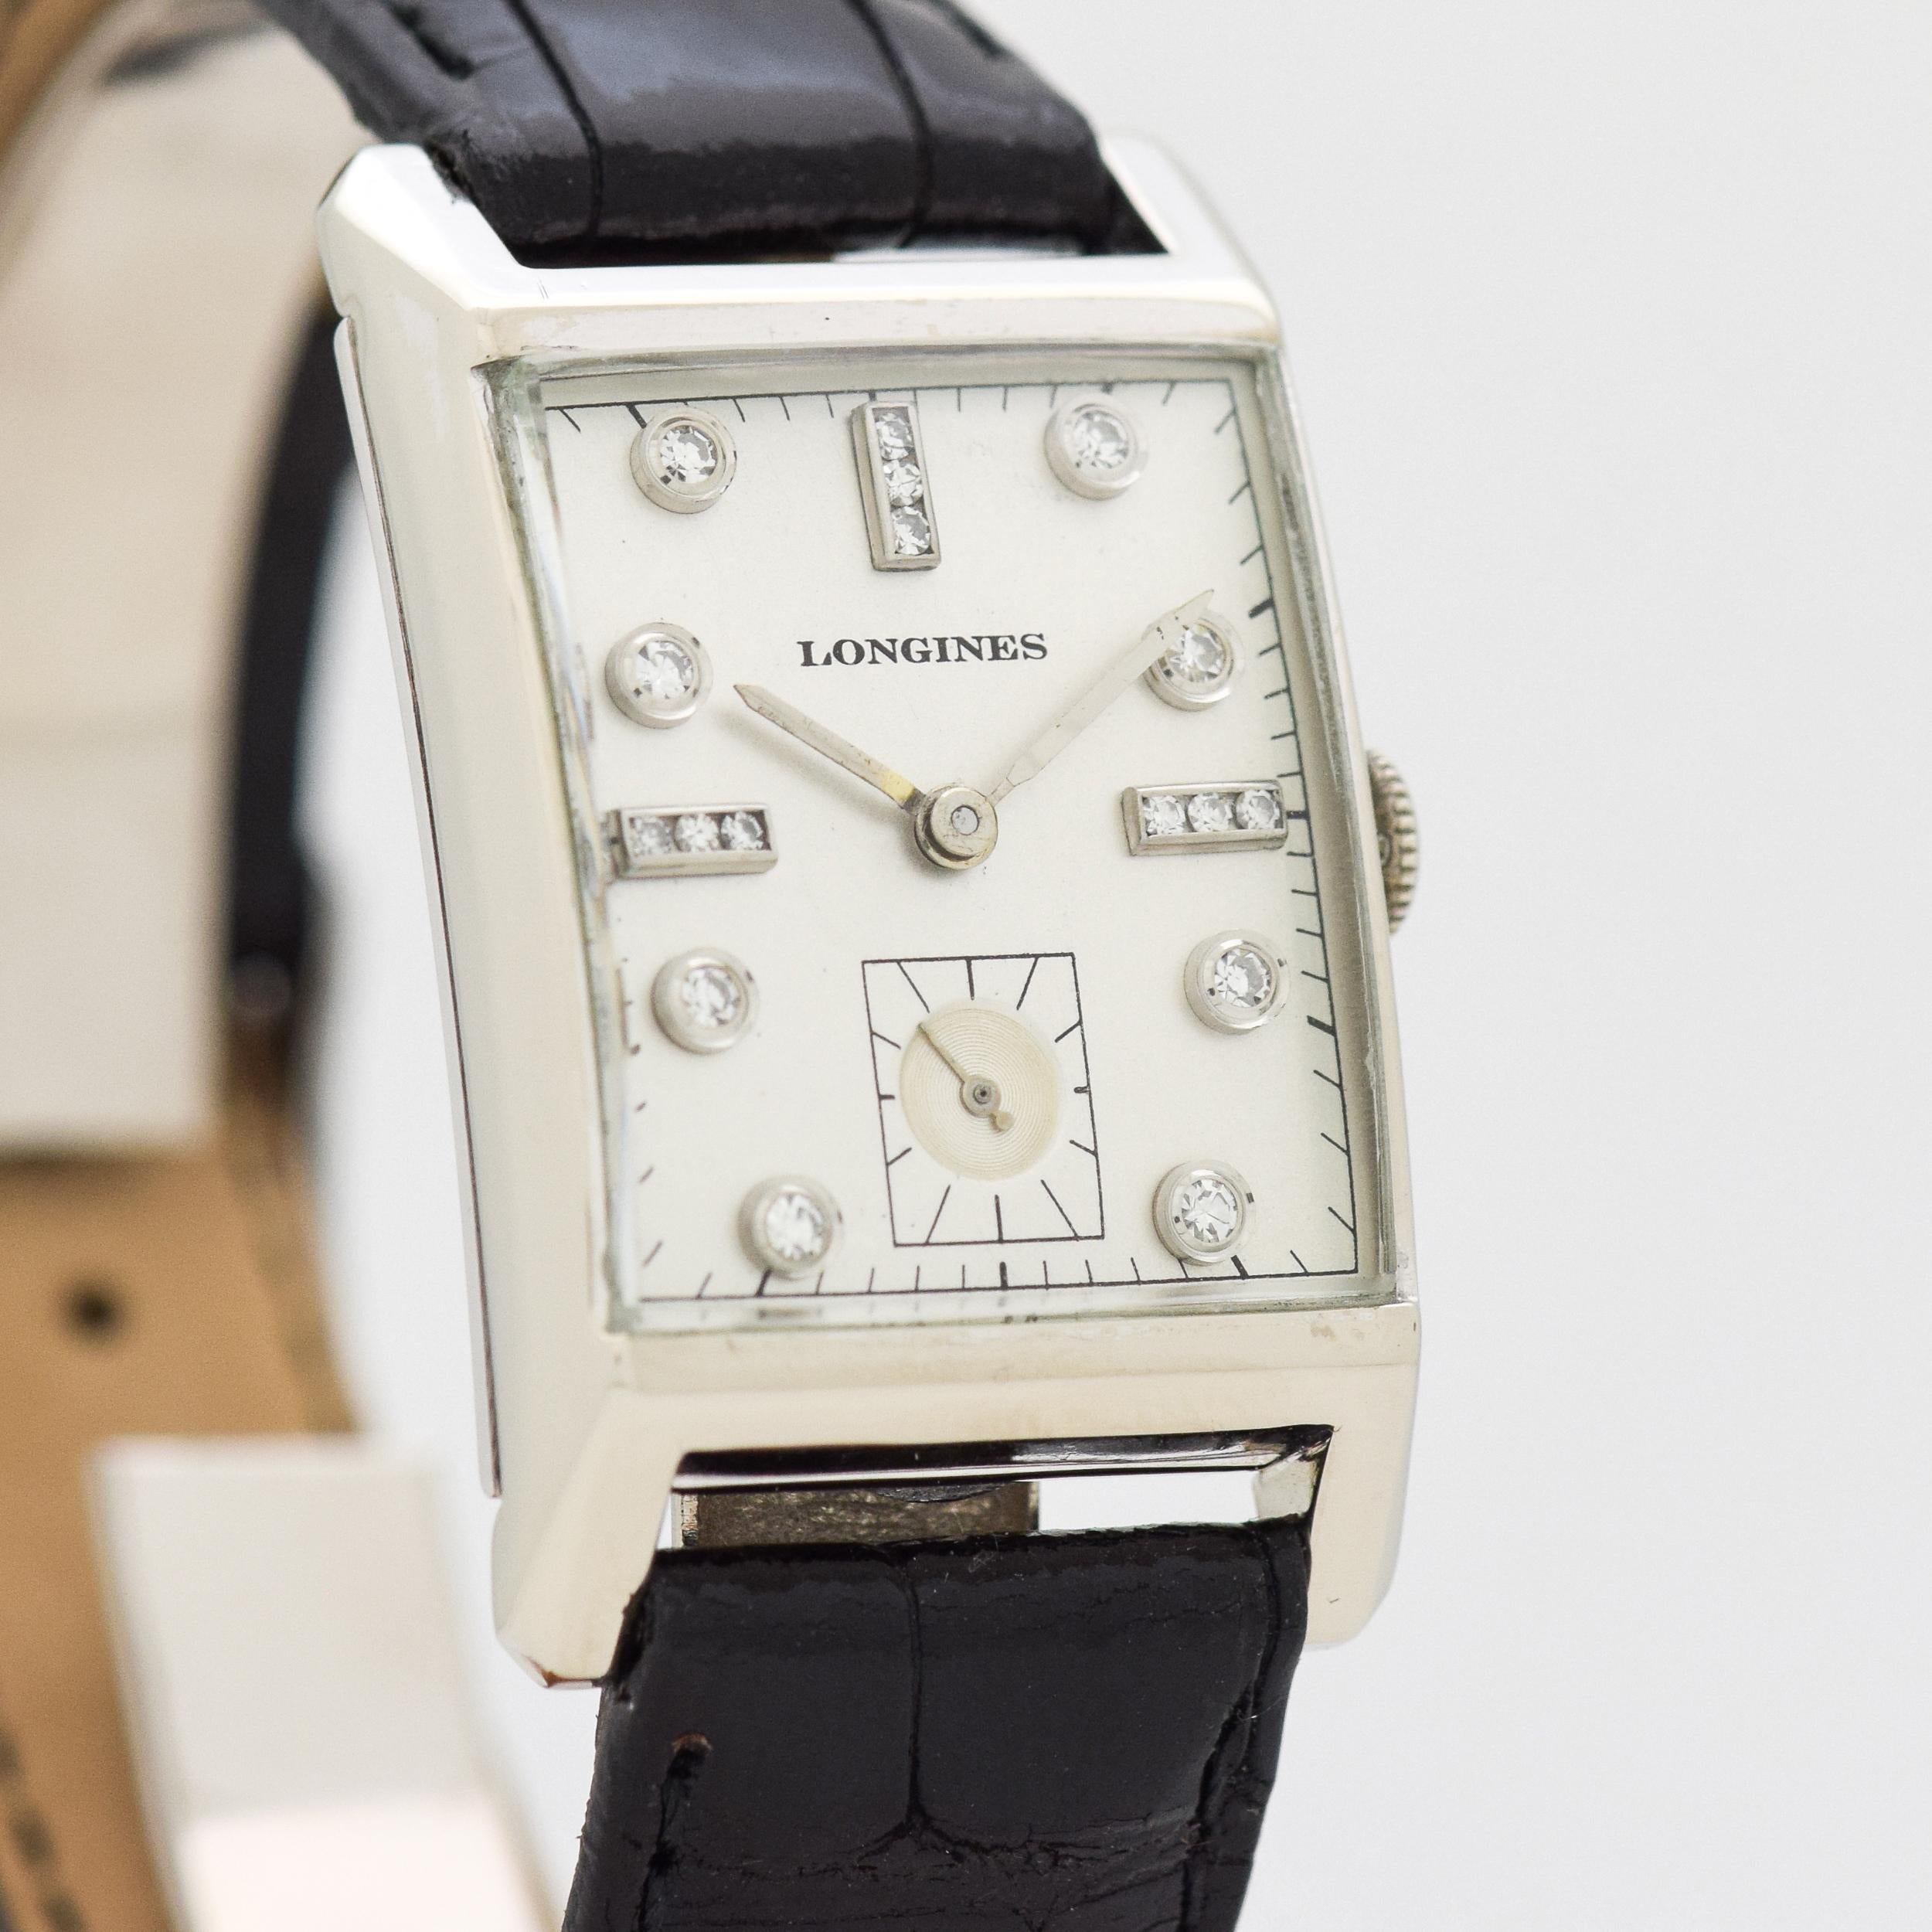 1950 Vintage Longines 14k White Gold watch with Silver Dial with Applied Framed Diamond Dot and Bar Markers. 23mm x 39mm lug to lug (0.91 in. x 1.54 in.) - 17 jewel, manual caliber movement. Featured on a 100% Genuine Alligator Glossy Black Strap.